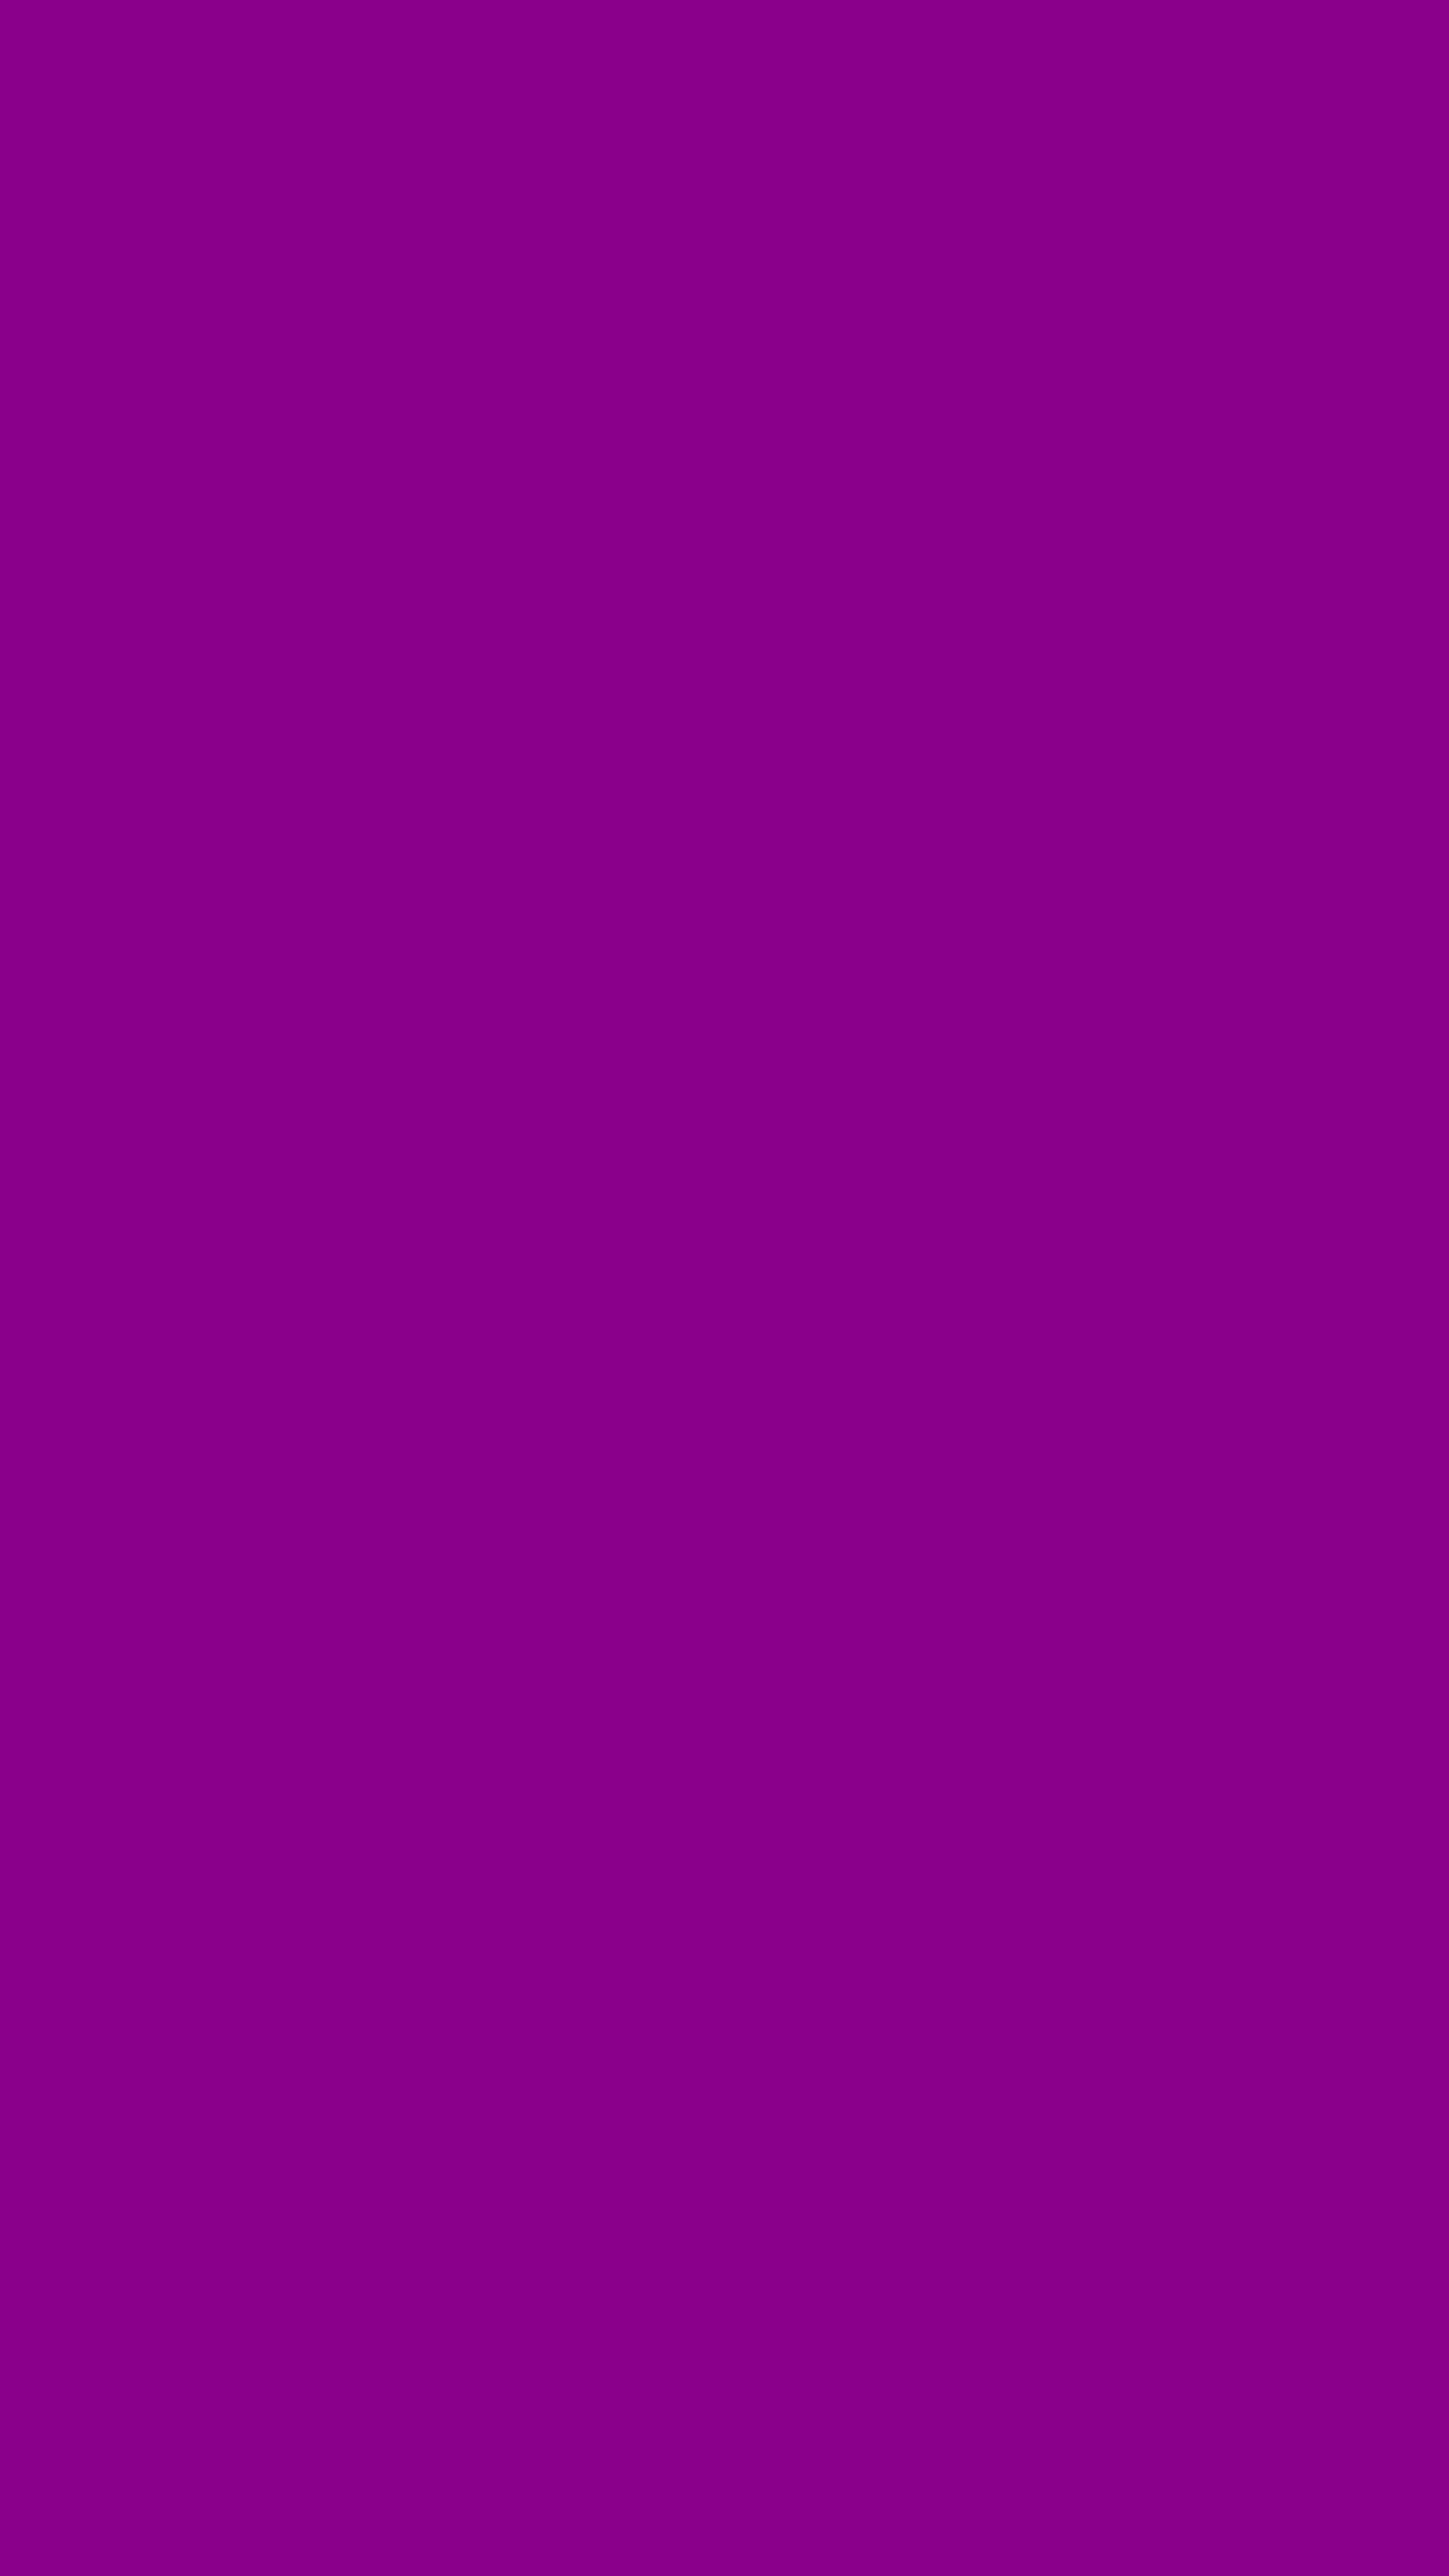 Dark Magenta Solid Color Background Wallpaper For Mobile – Phone -  Chill-out Wallpapers